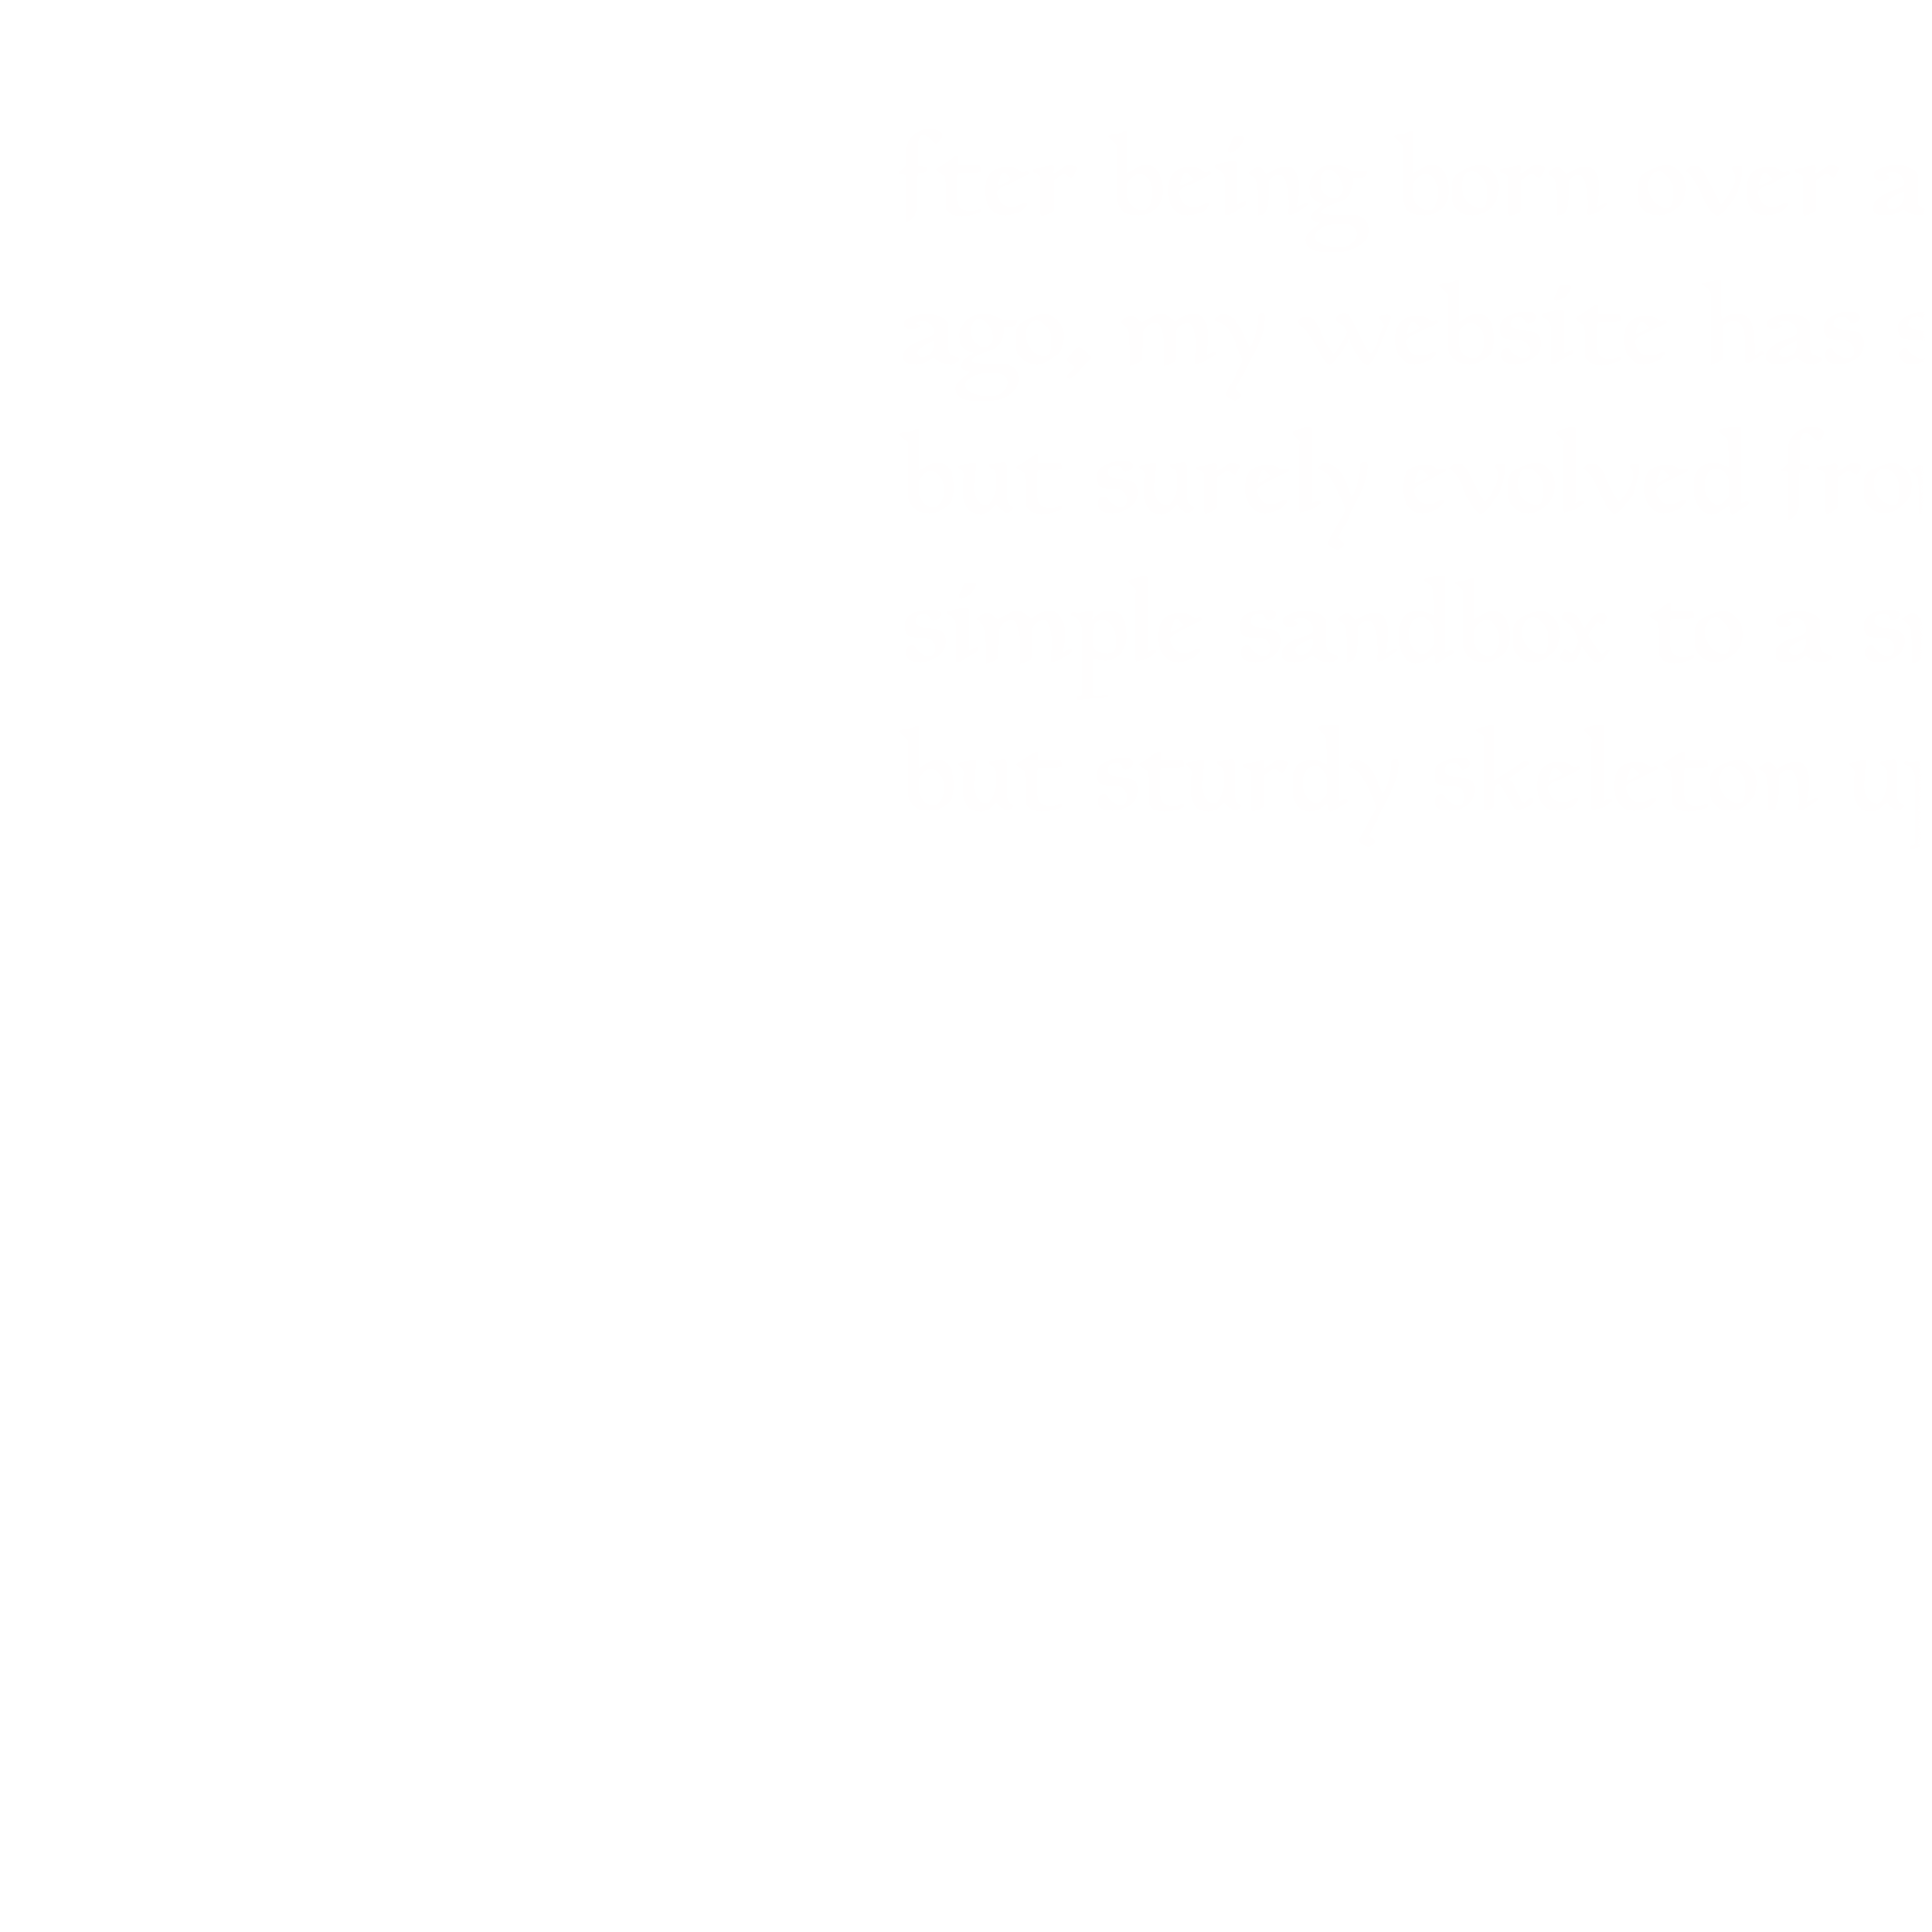 A sketch of the first paragraph of this blog post, rendered with fancy medieval script and an elaborate floral illuminated 'A' at the head of the paragraph.